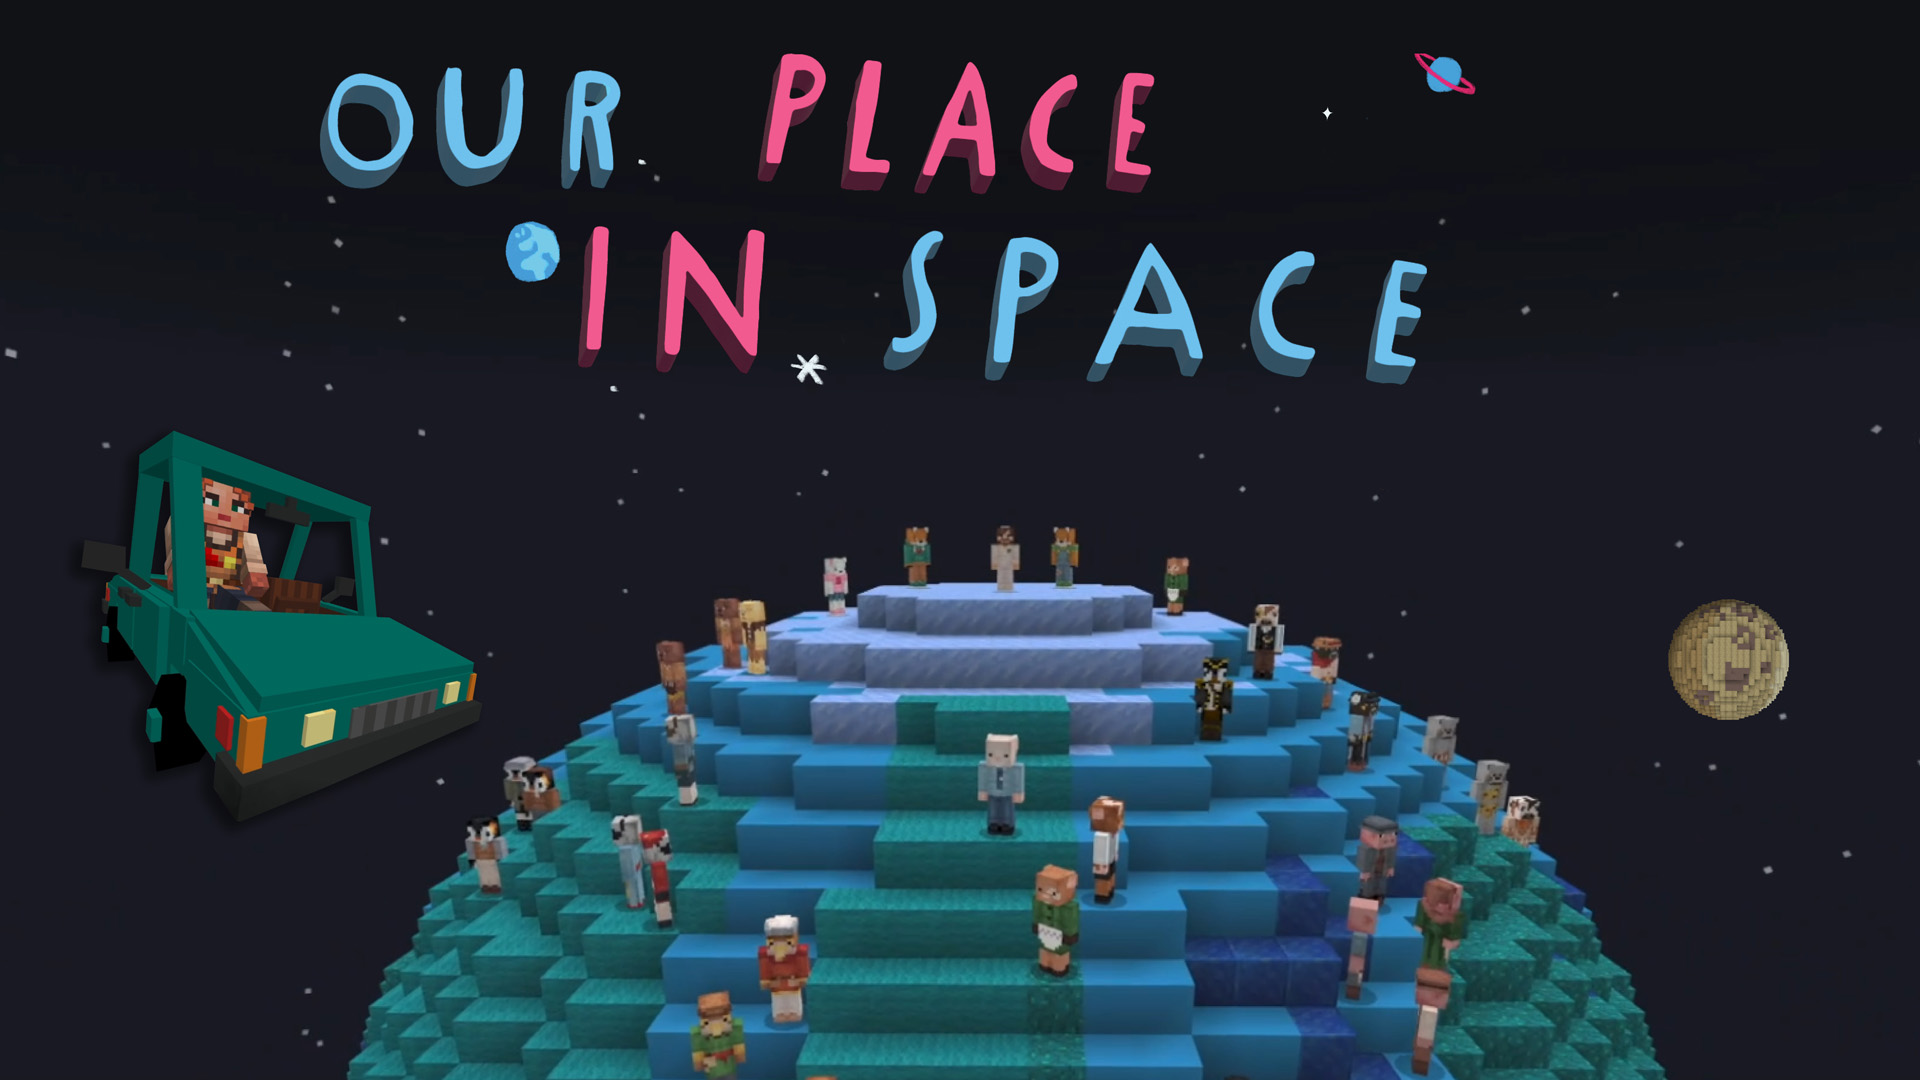 Our Place in Space Minecraft World